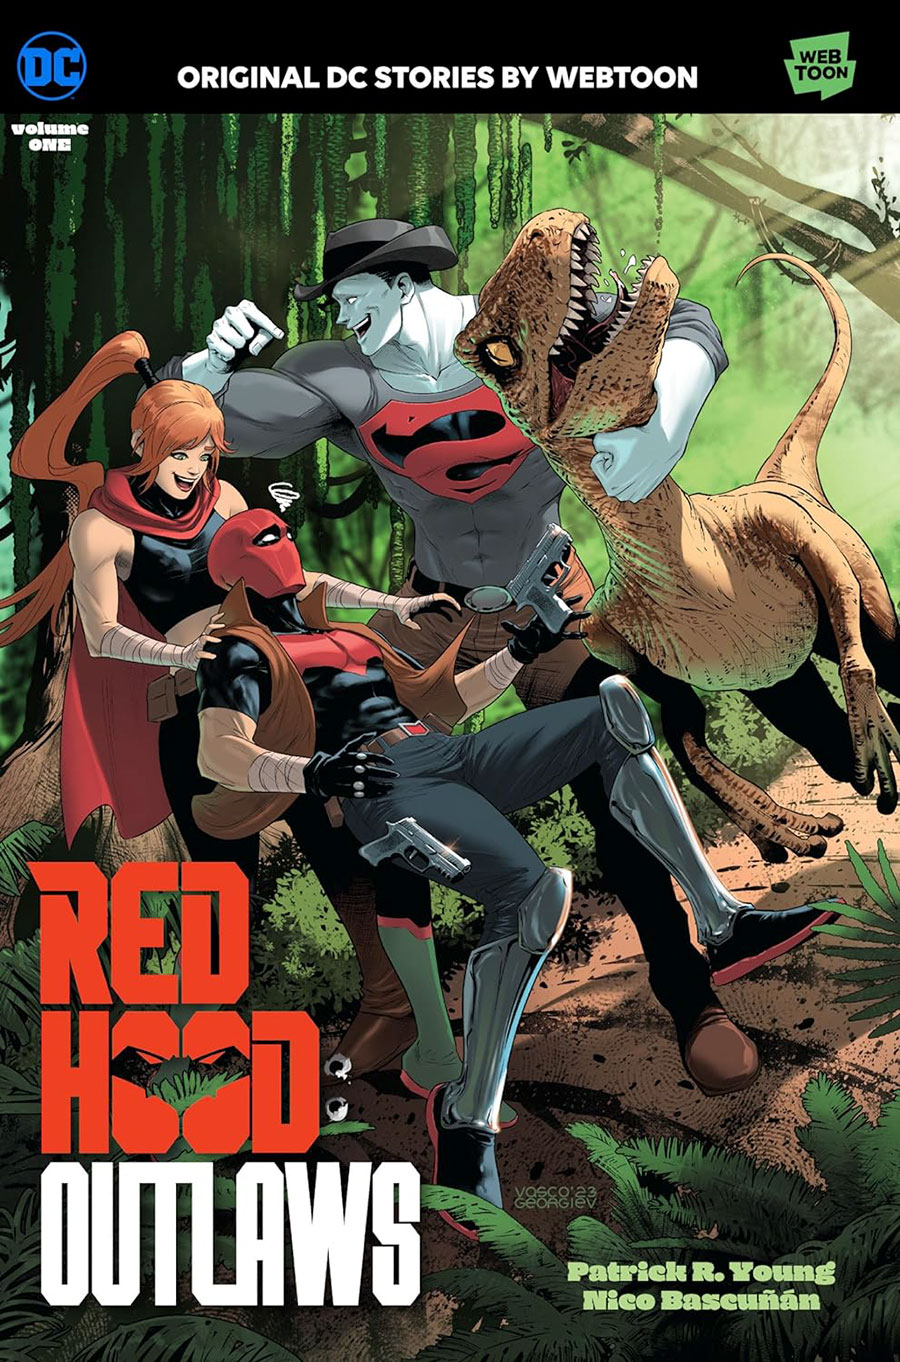 Red Hood Outlaws Vol 1 TP